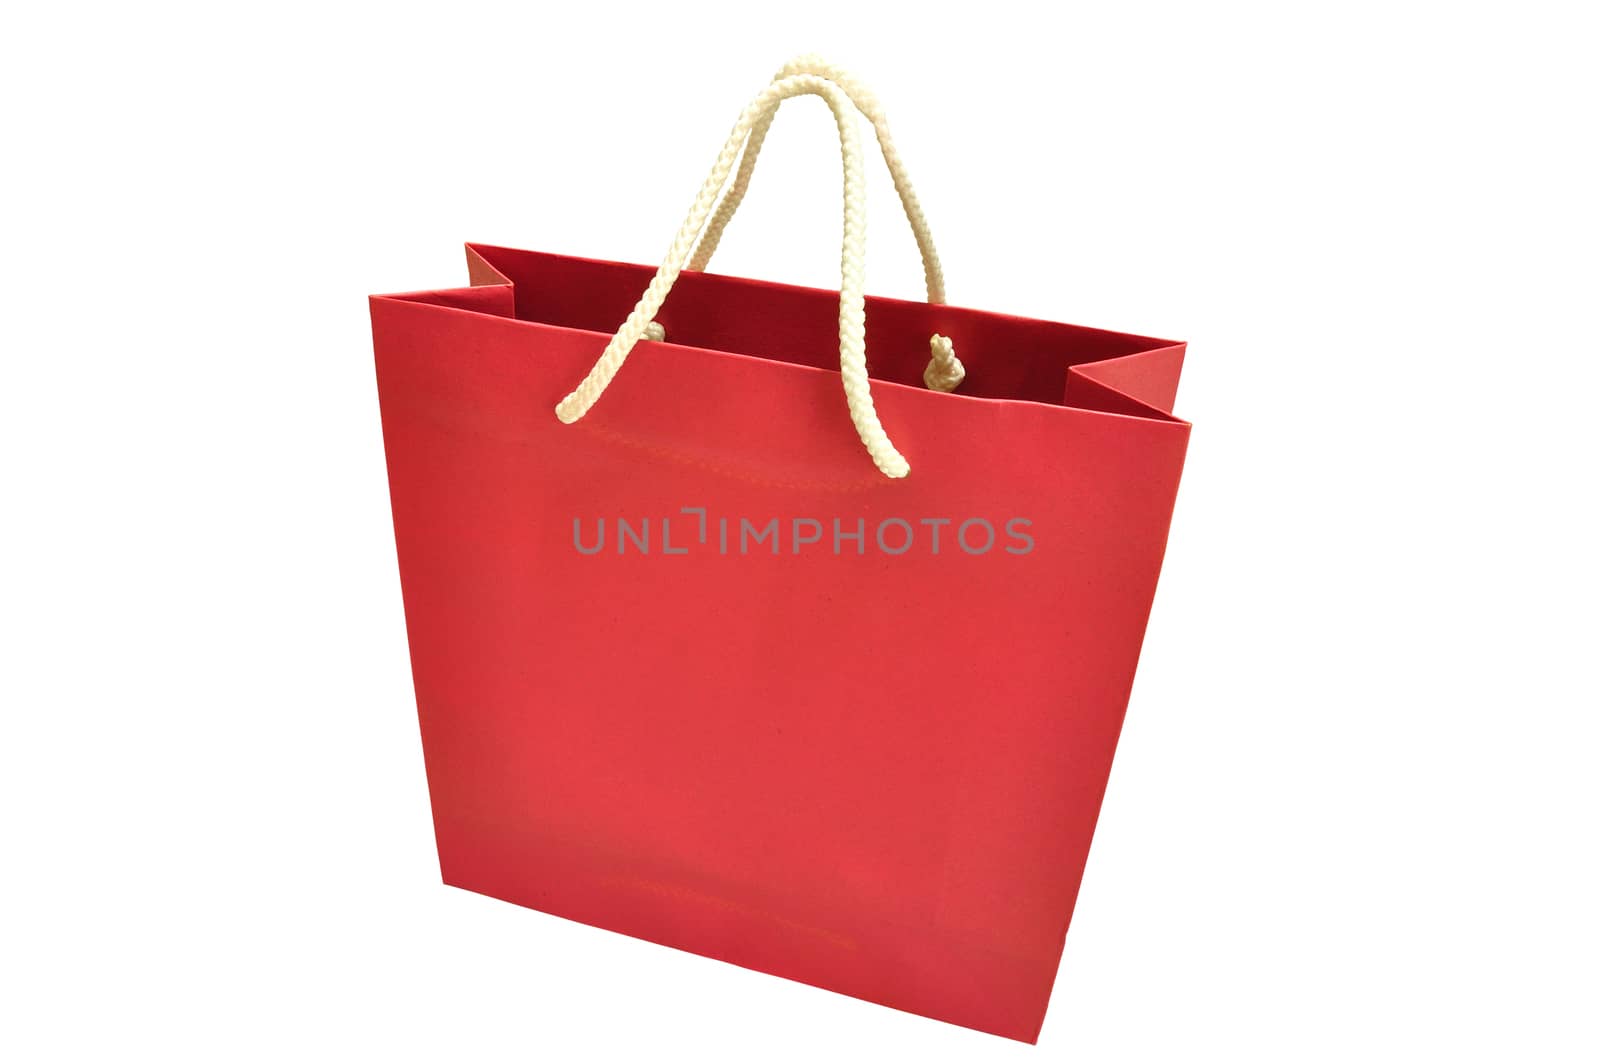 Paper shopping bag on white background by thampapon